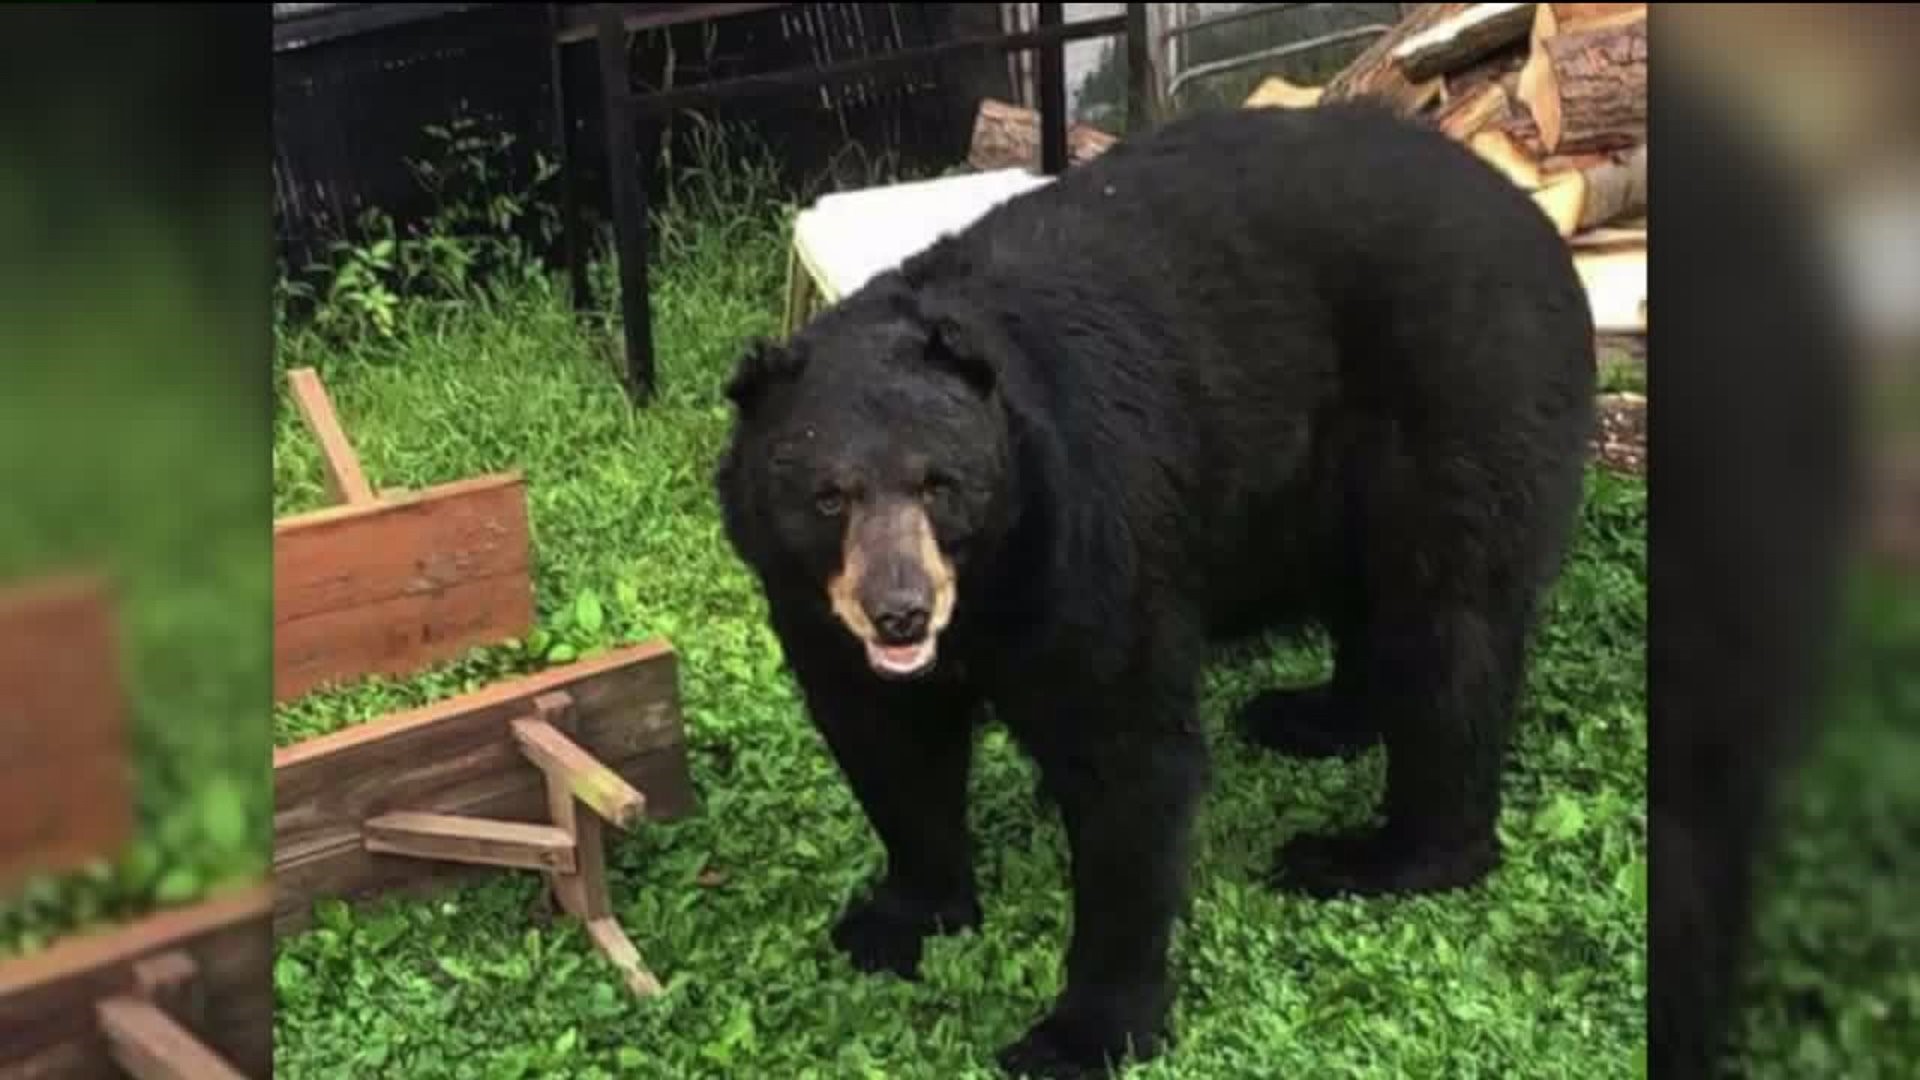 'Yeah, it is scary' - Bear Encounters on the Upswing in Luzerne County